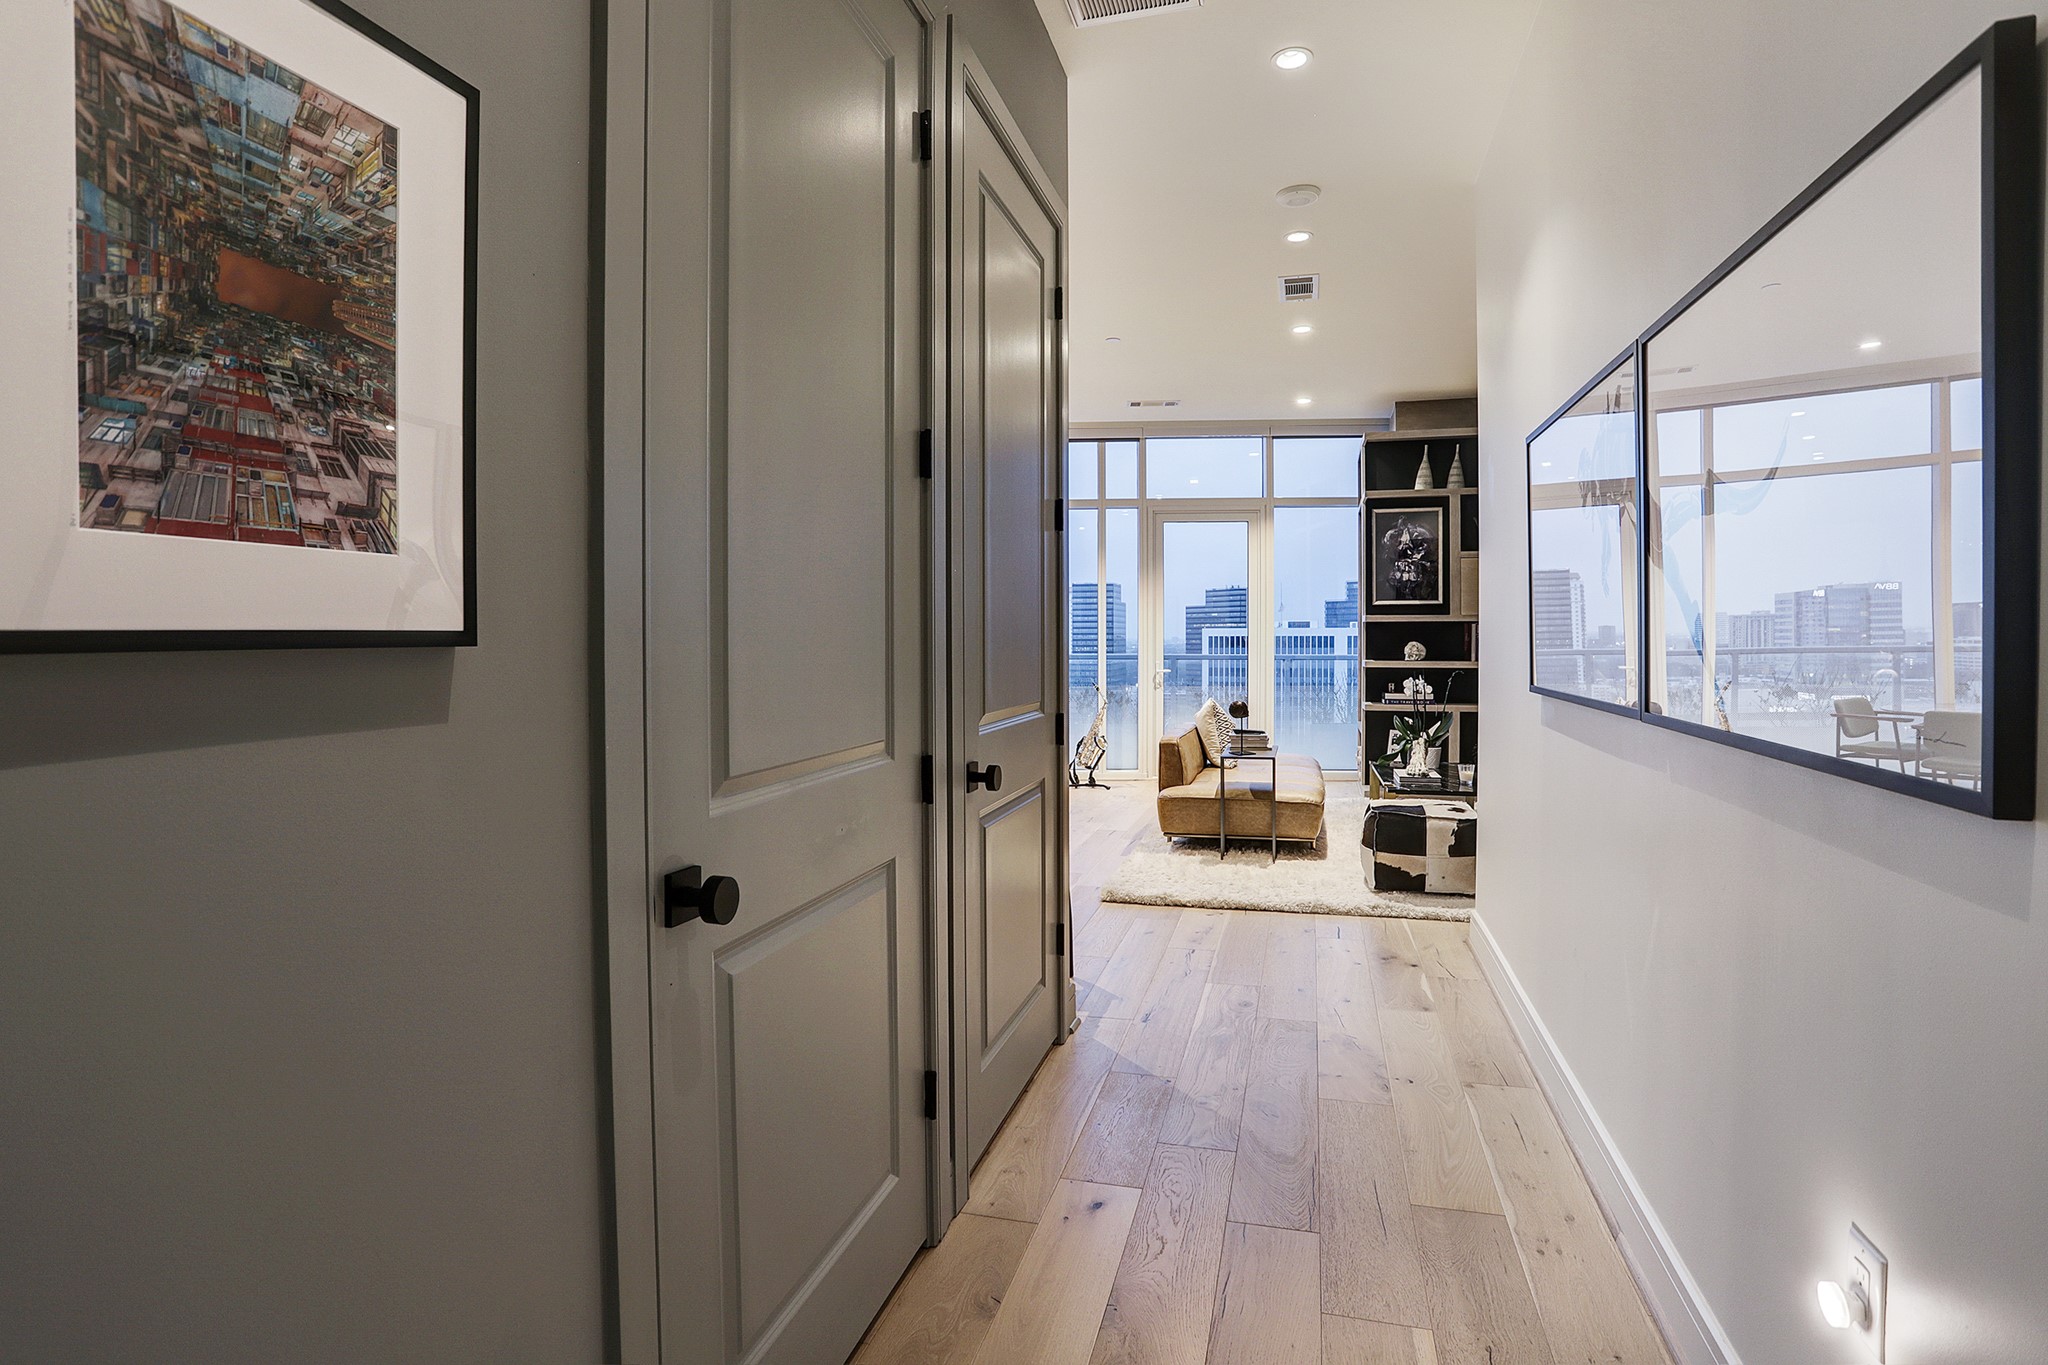 The GALLERY ENTRY leads to a spacious Living Area & Kitchen.  Notice the timeless beauty of the wide-plank French oak flooring.